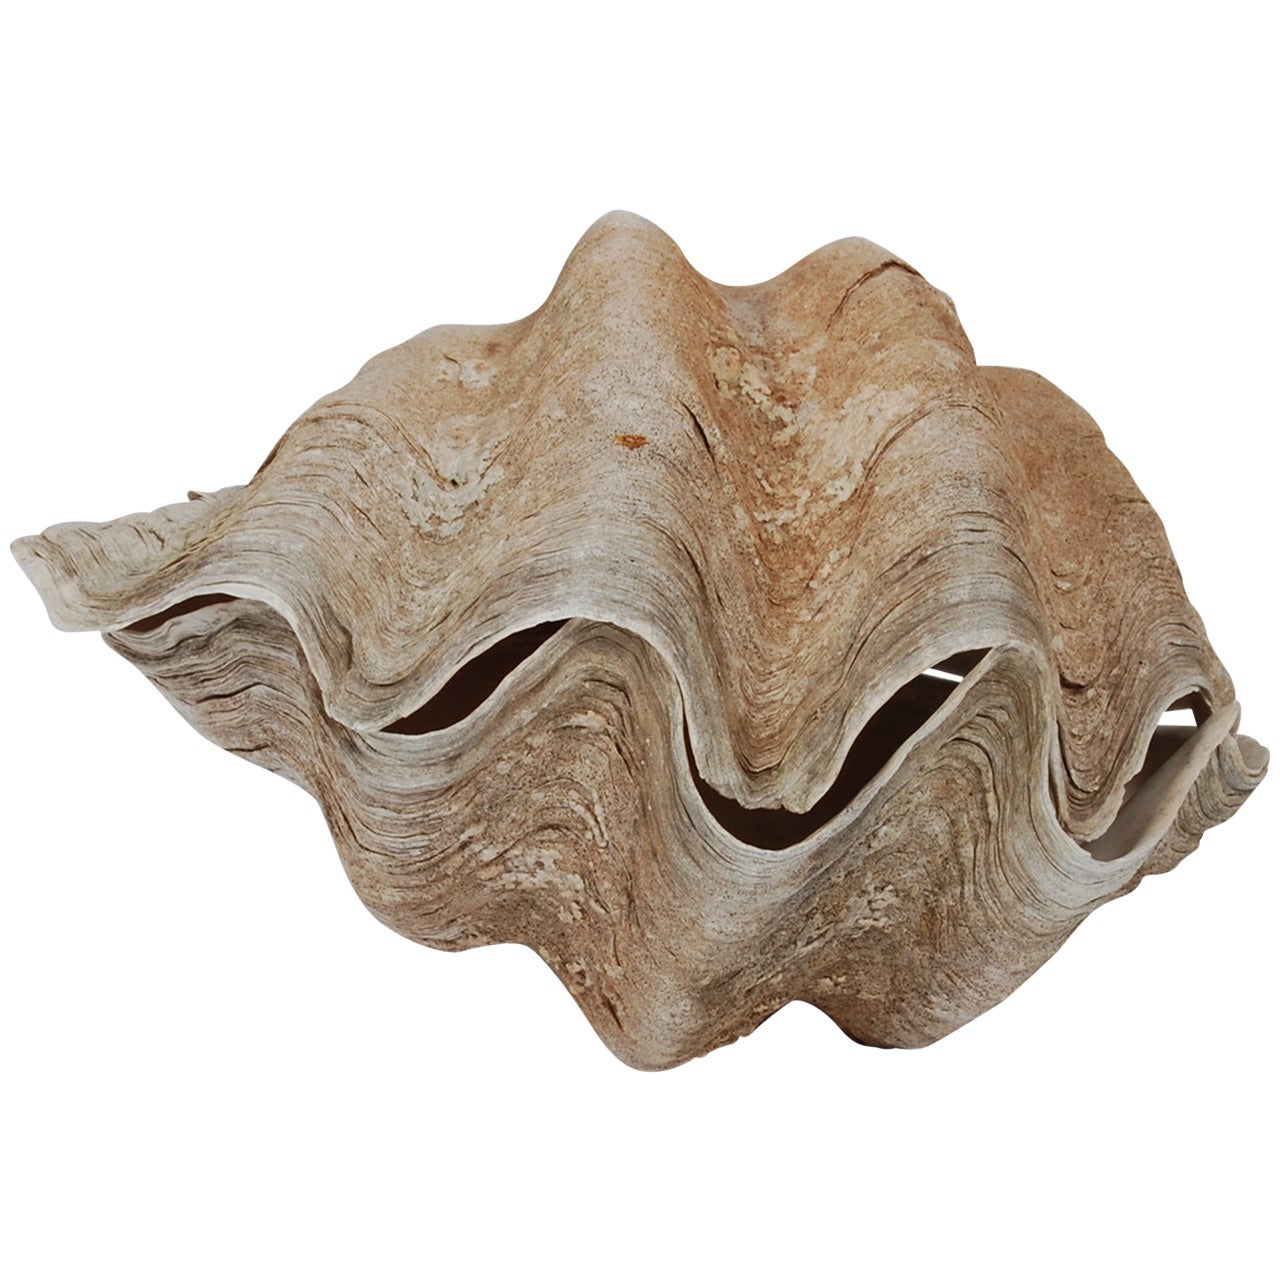 Giant Matched Sides Clam Shell